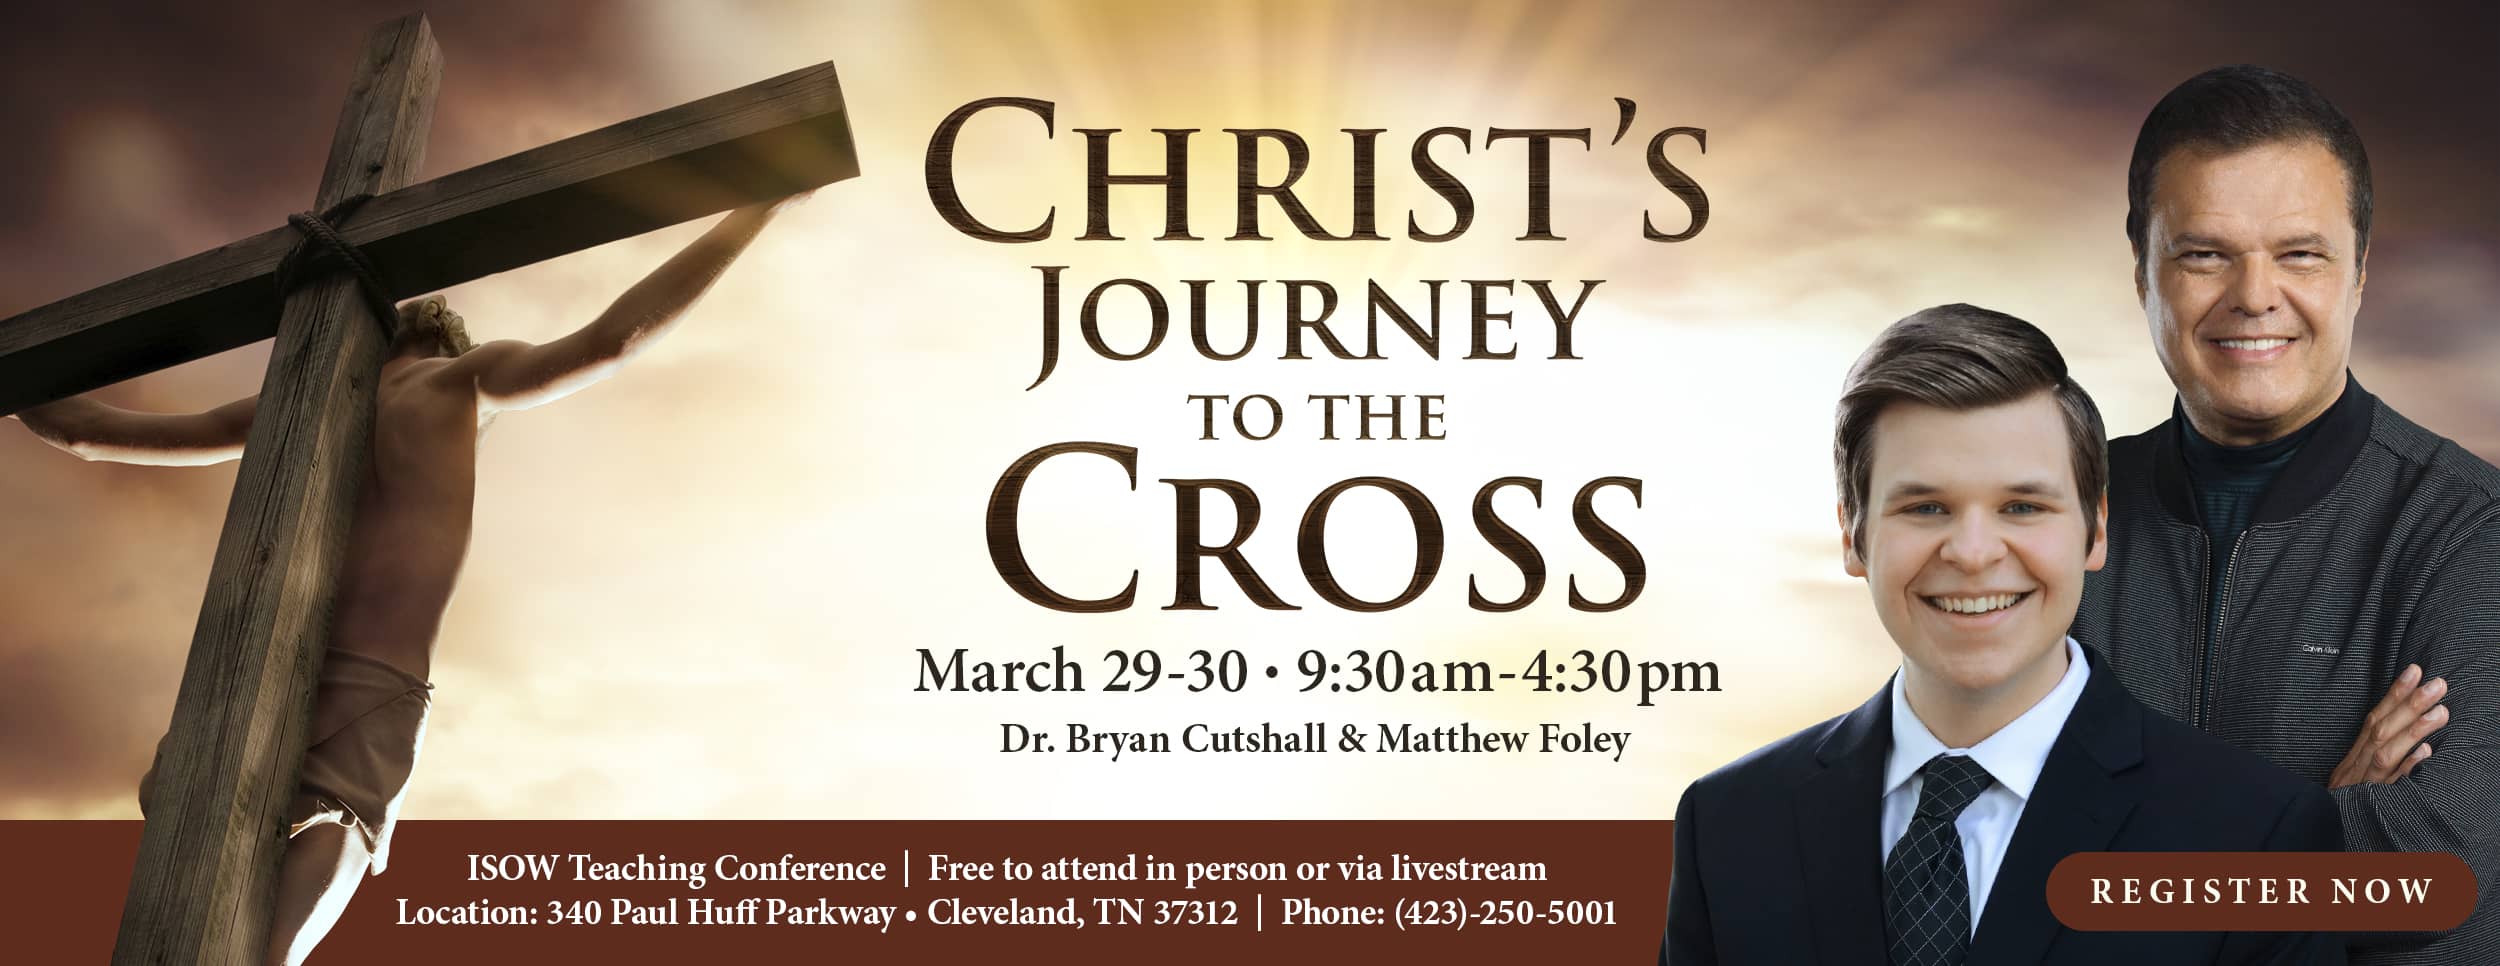 Christ’s Journey to the Cross Teaching Conference – Website Banner v2